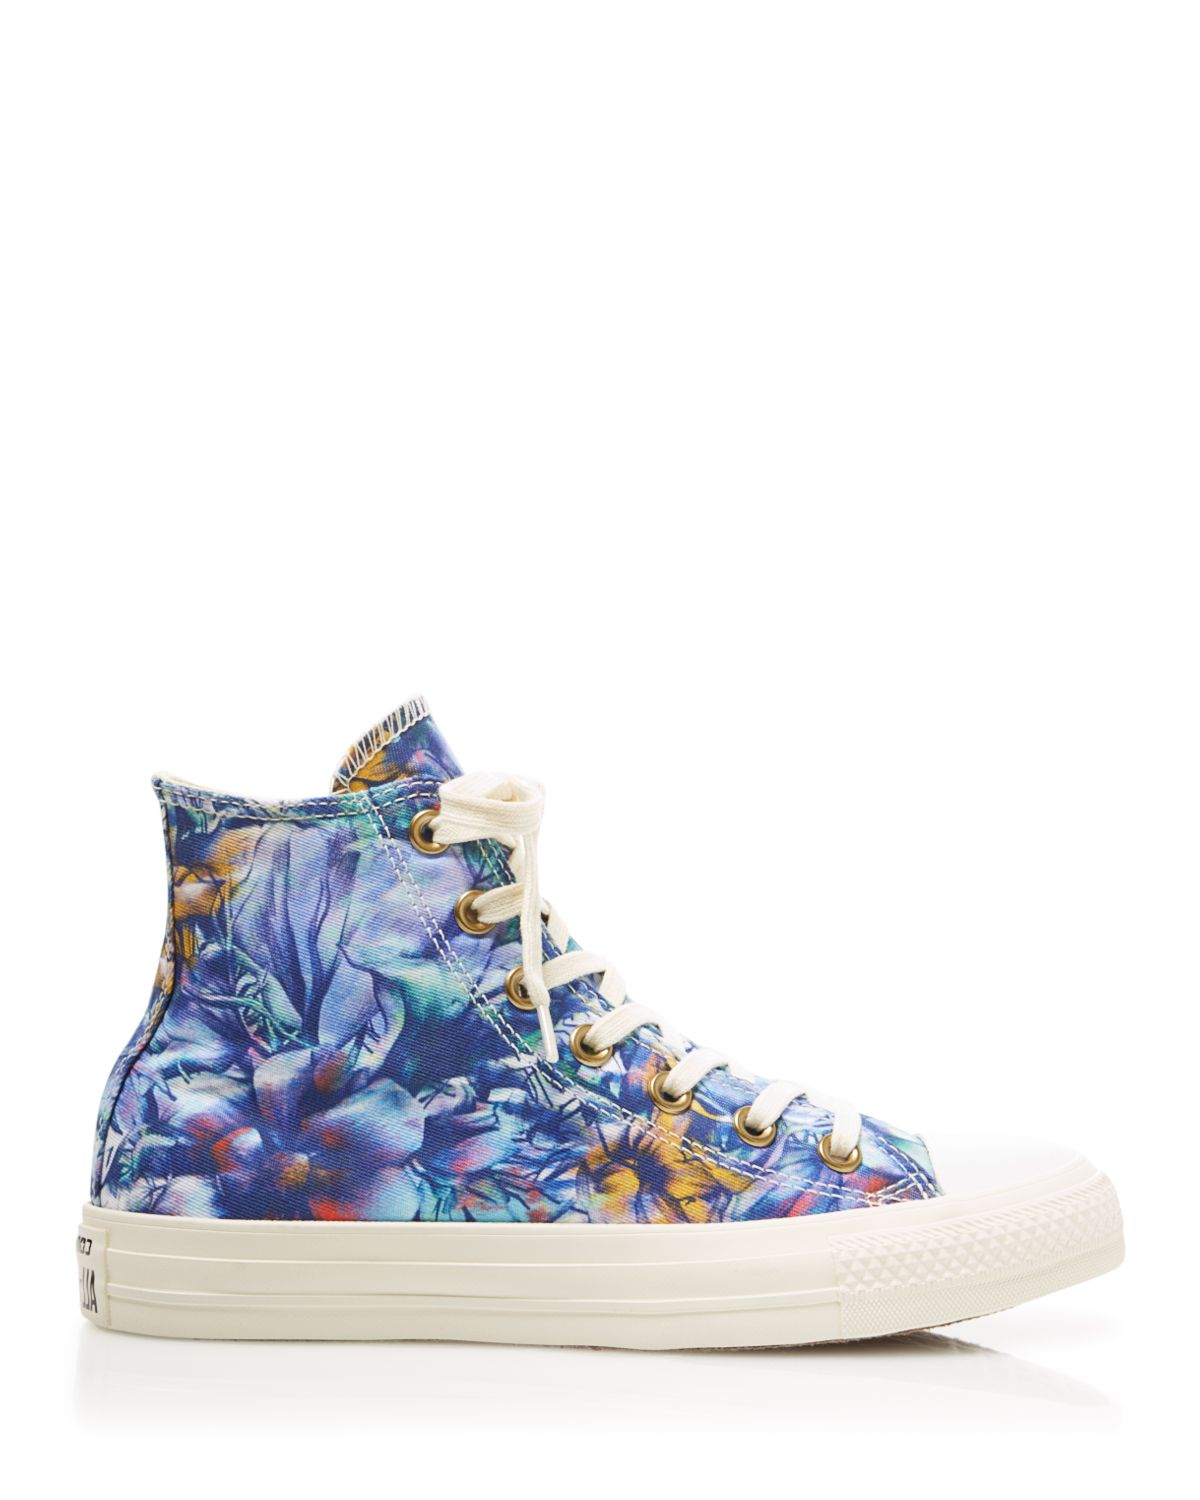 Converse High Top Sneakers - Floral Print in Blue (Peacock Multi) | Lyst